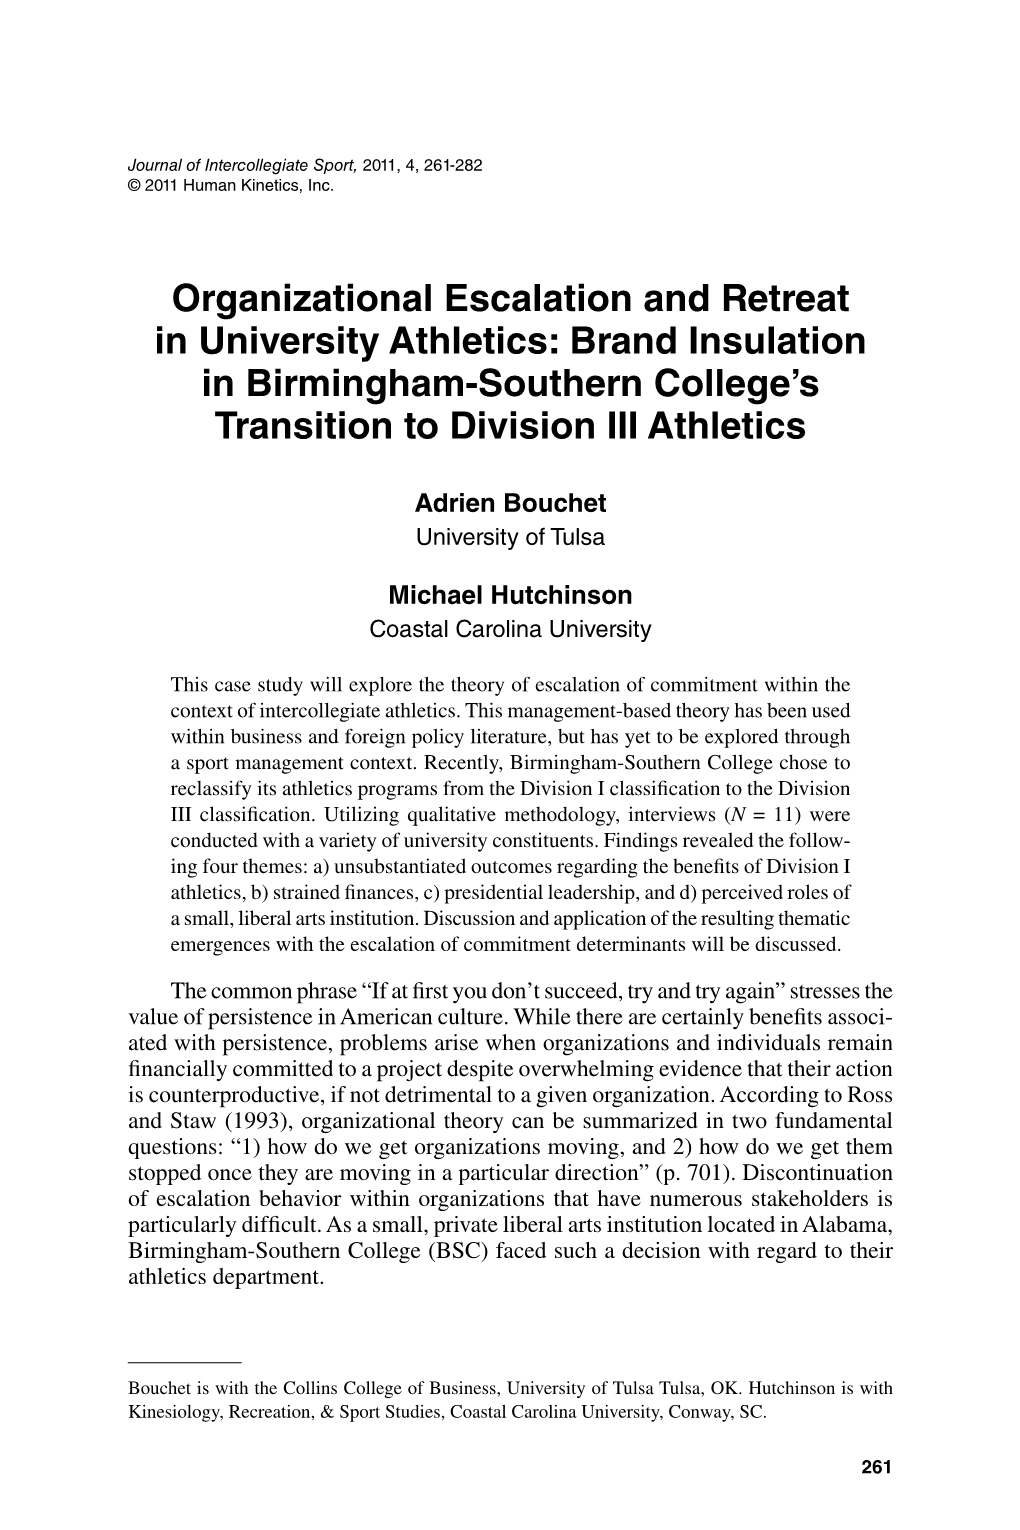 Organizational Escalation and Retreat in University Athletics: Brand Insulation in Birmingham-Southern College’S Transition to Division III Athletics